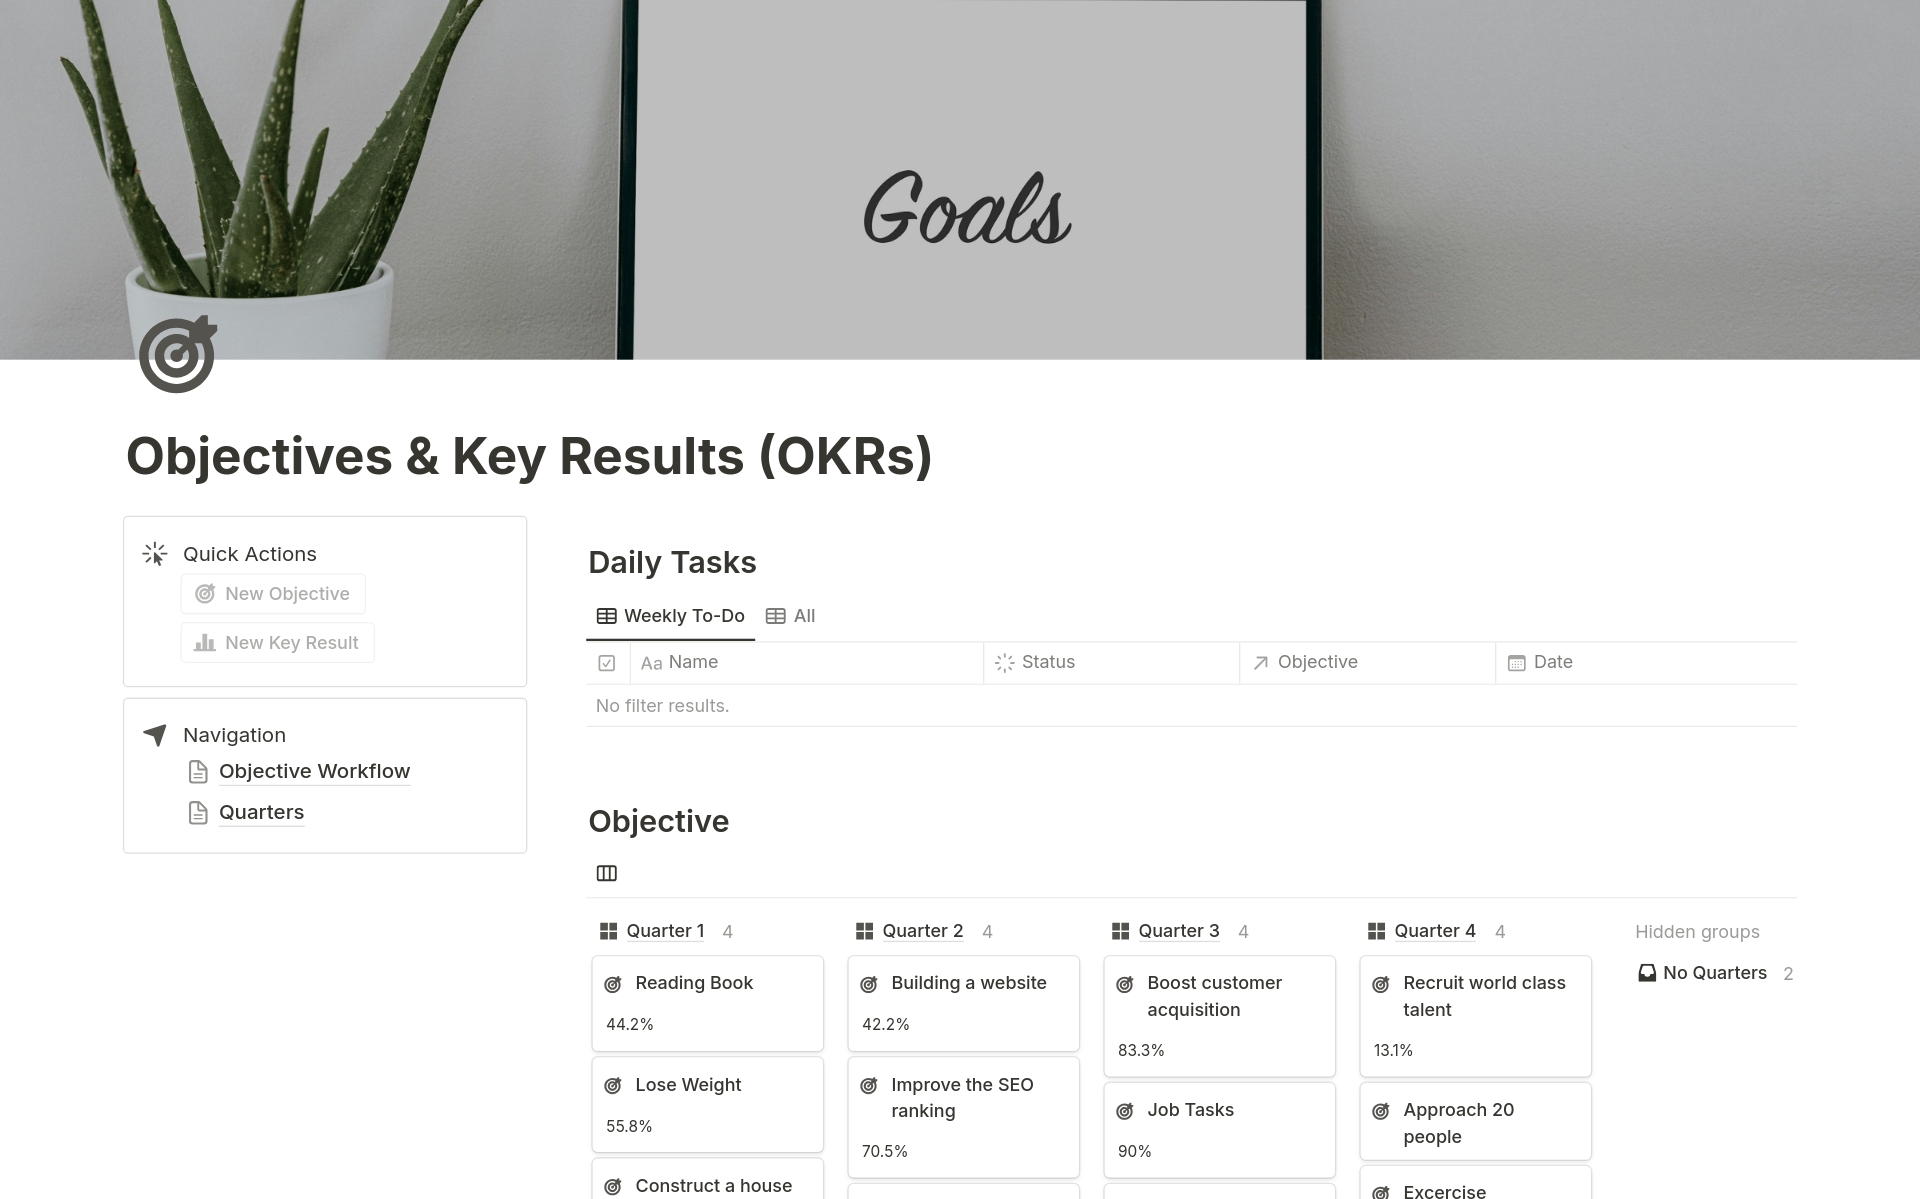 Your Journey to Achieving Your Goals Begins Now! Harness the Power of This Notion Template to Implement Objectives and Key Results (OKRs) and Drive Results Effortlessly.